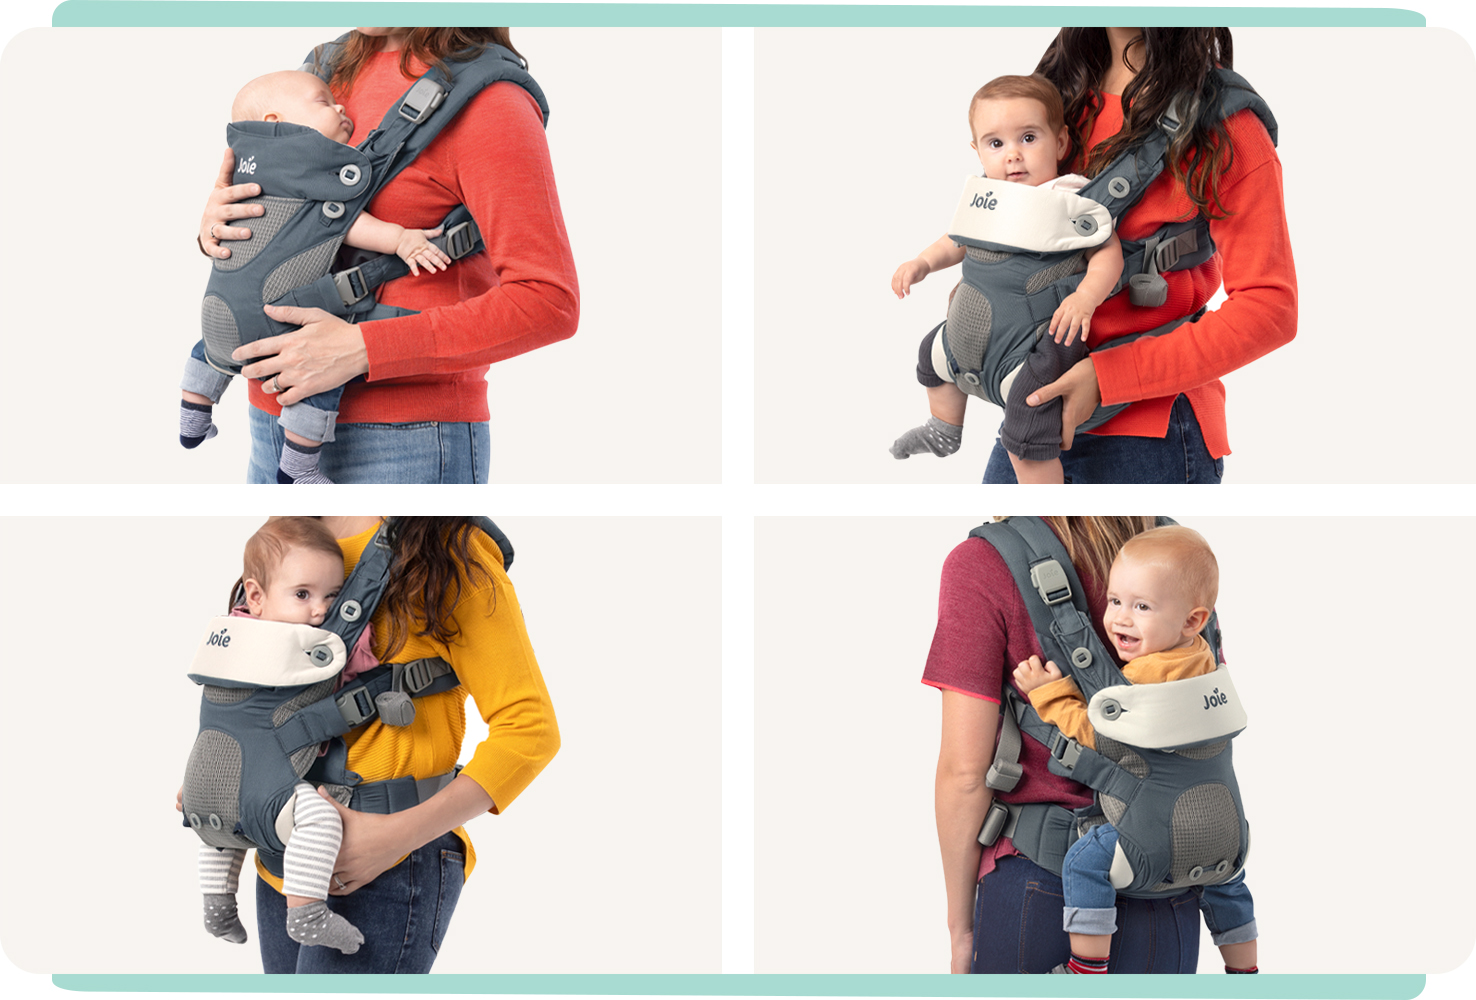  4 images of mums wearing babies in a blue Joie Savvy 4in1 carrier. Top left: infant mode. Bottom left: parent facing baby mode. Top right: world facing baby mode. Bottom right: back carry mode.